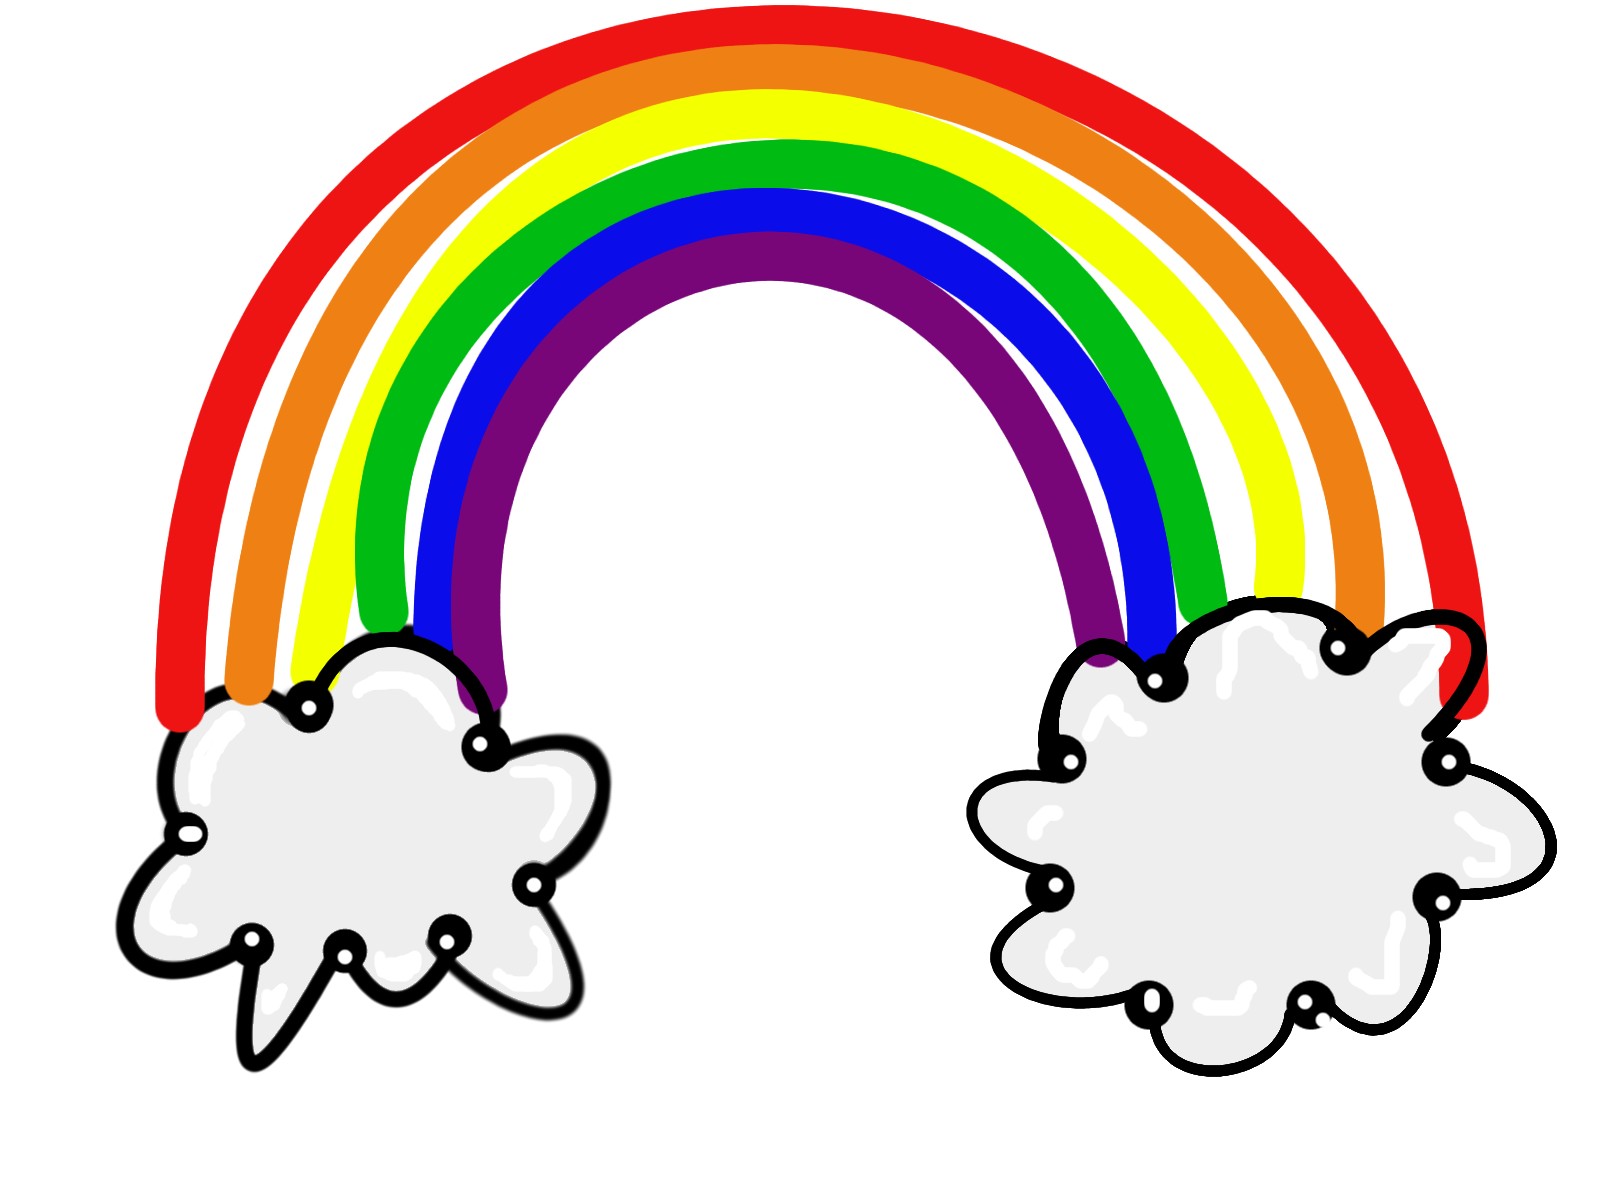 Rainbow  black and white rainbow clipart black and white free images 4 3